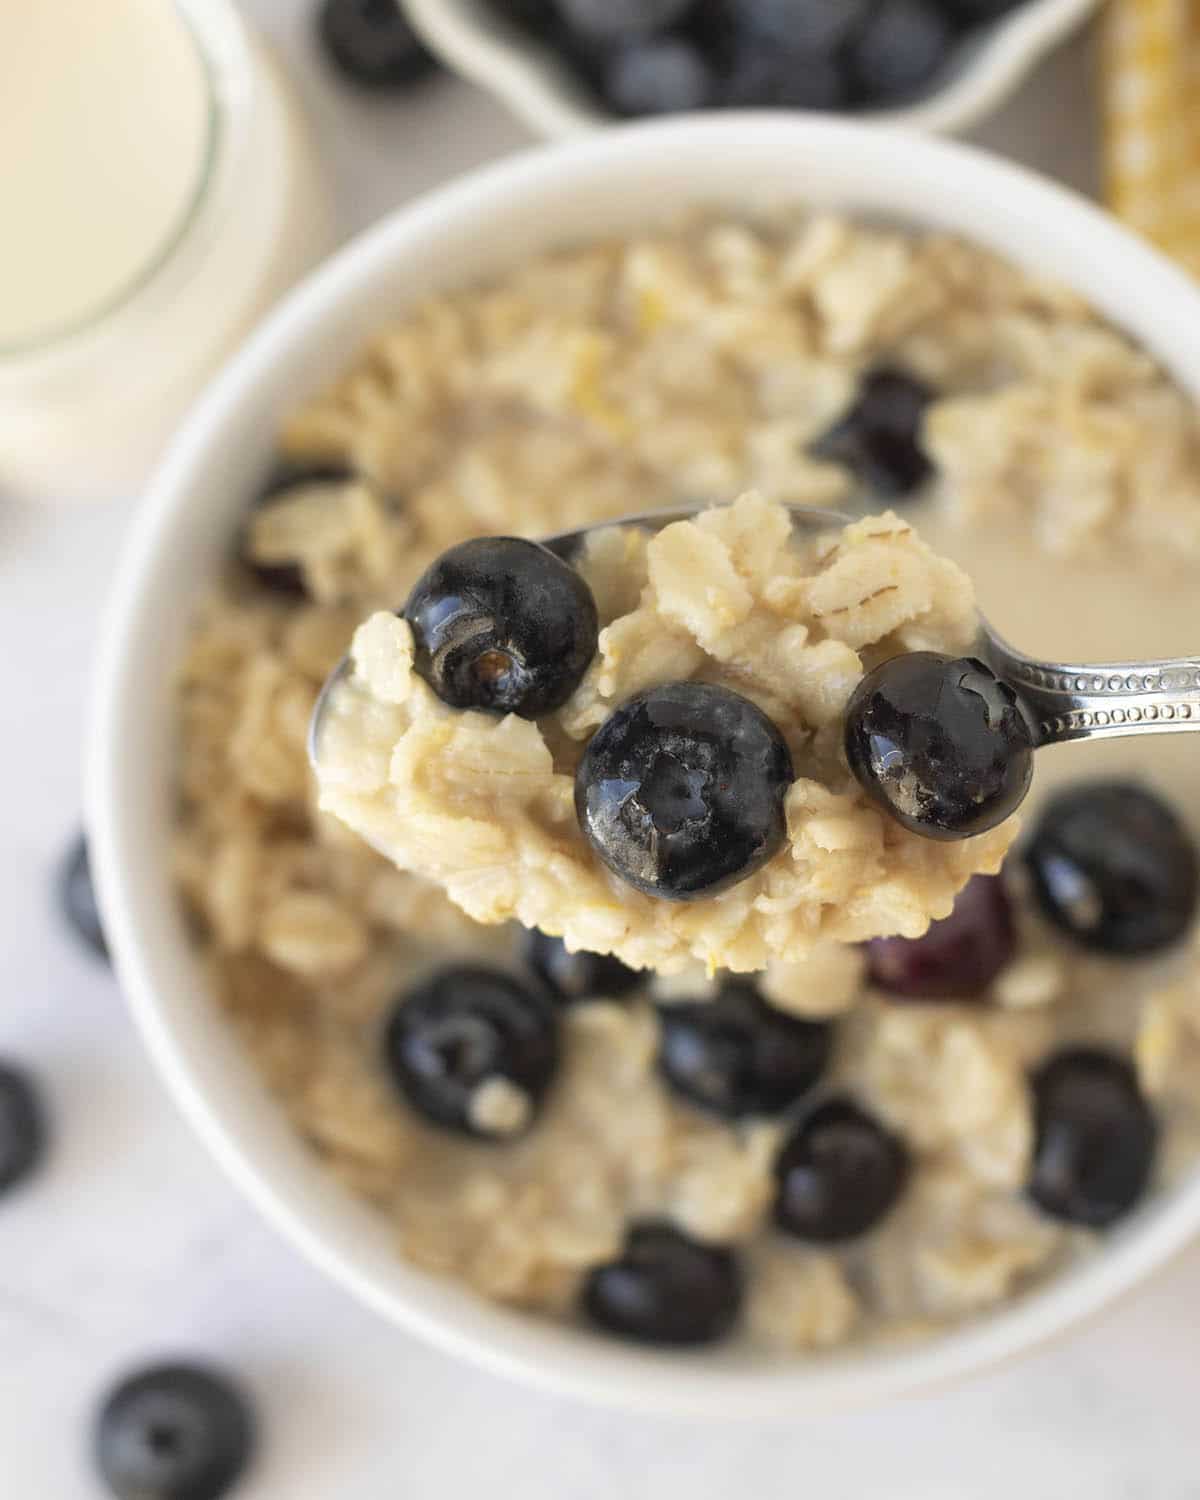 A spoonful of oatmeal and blueberries being held up above a full bowl of the same oatmeal.